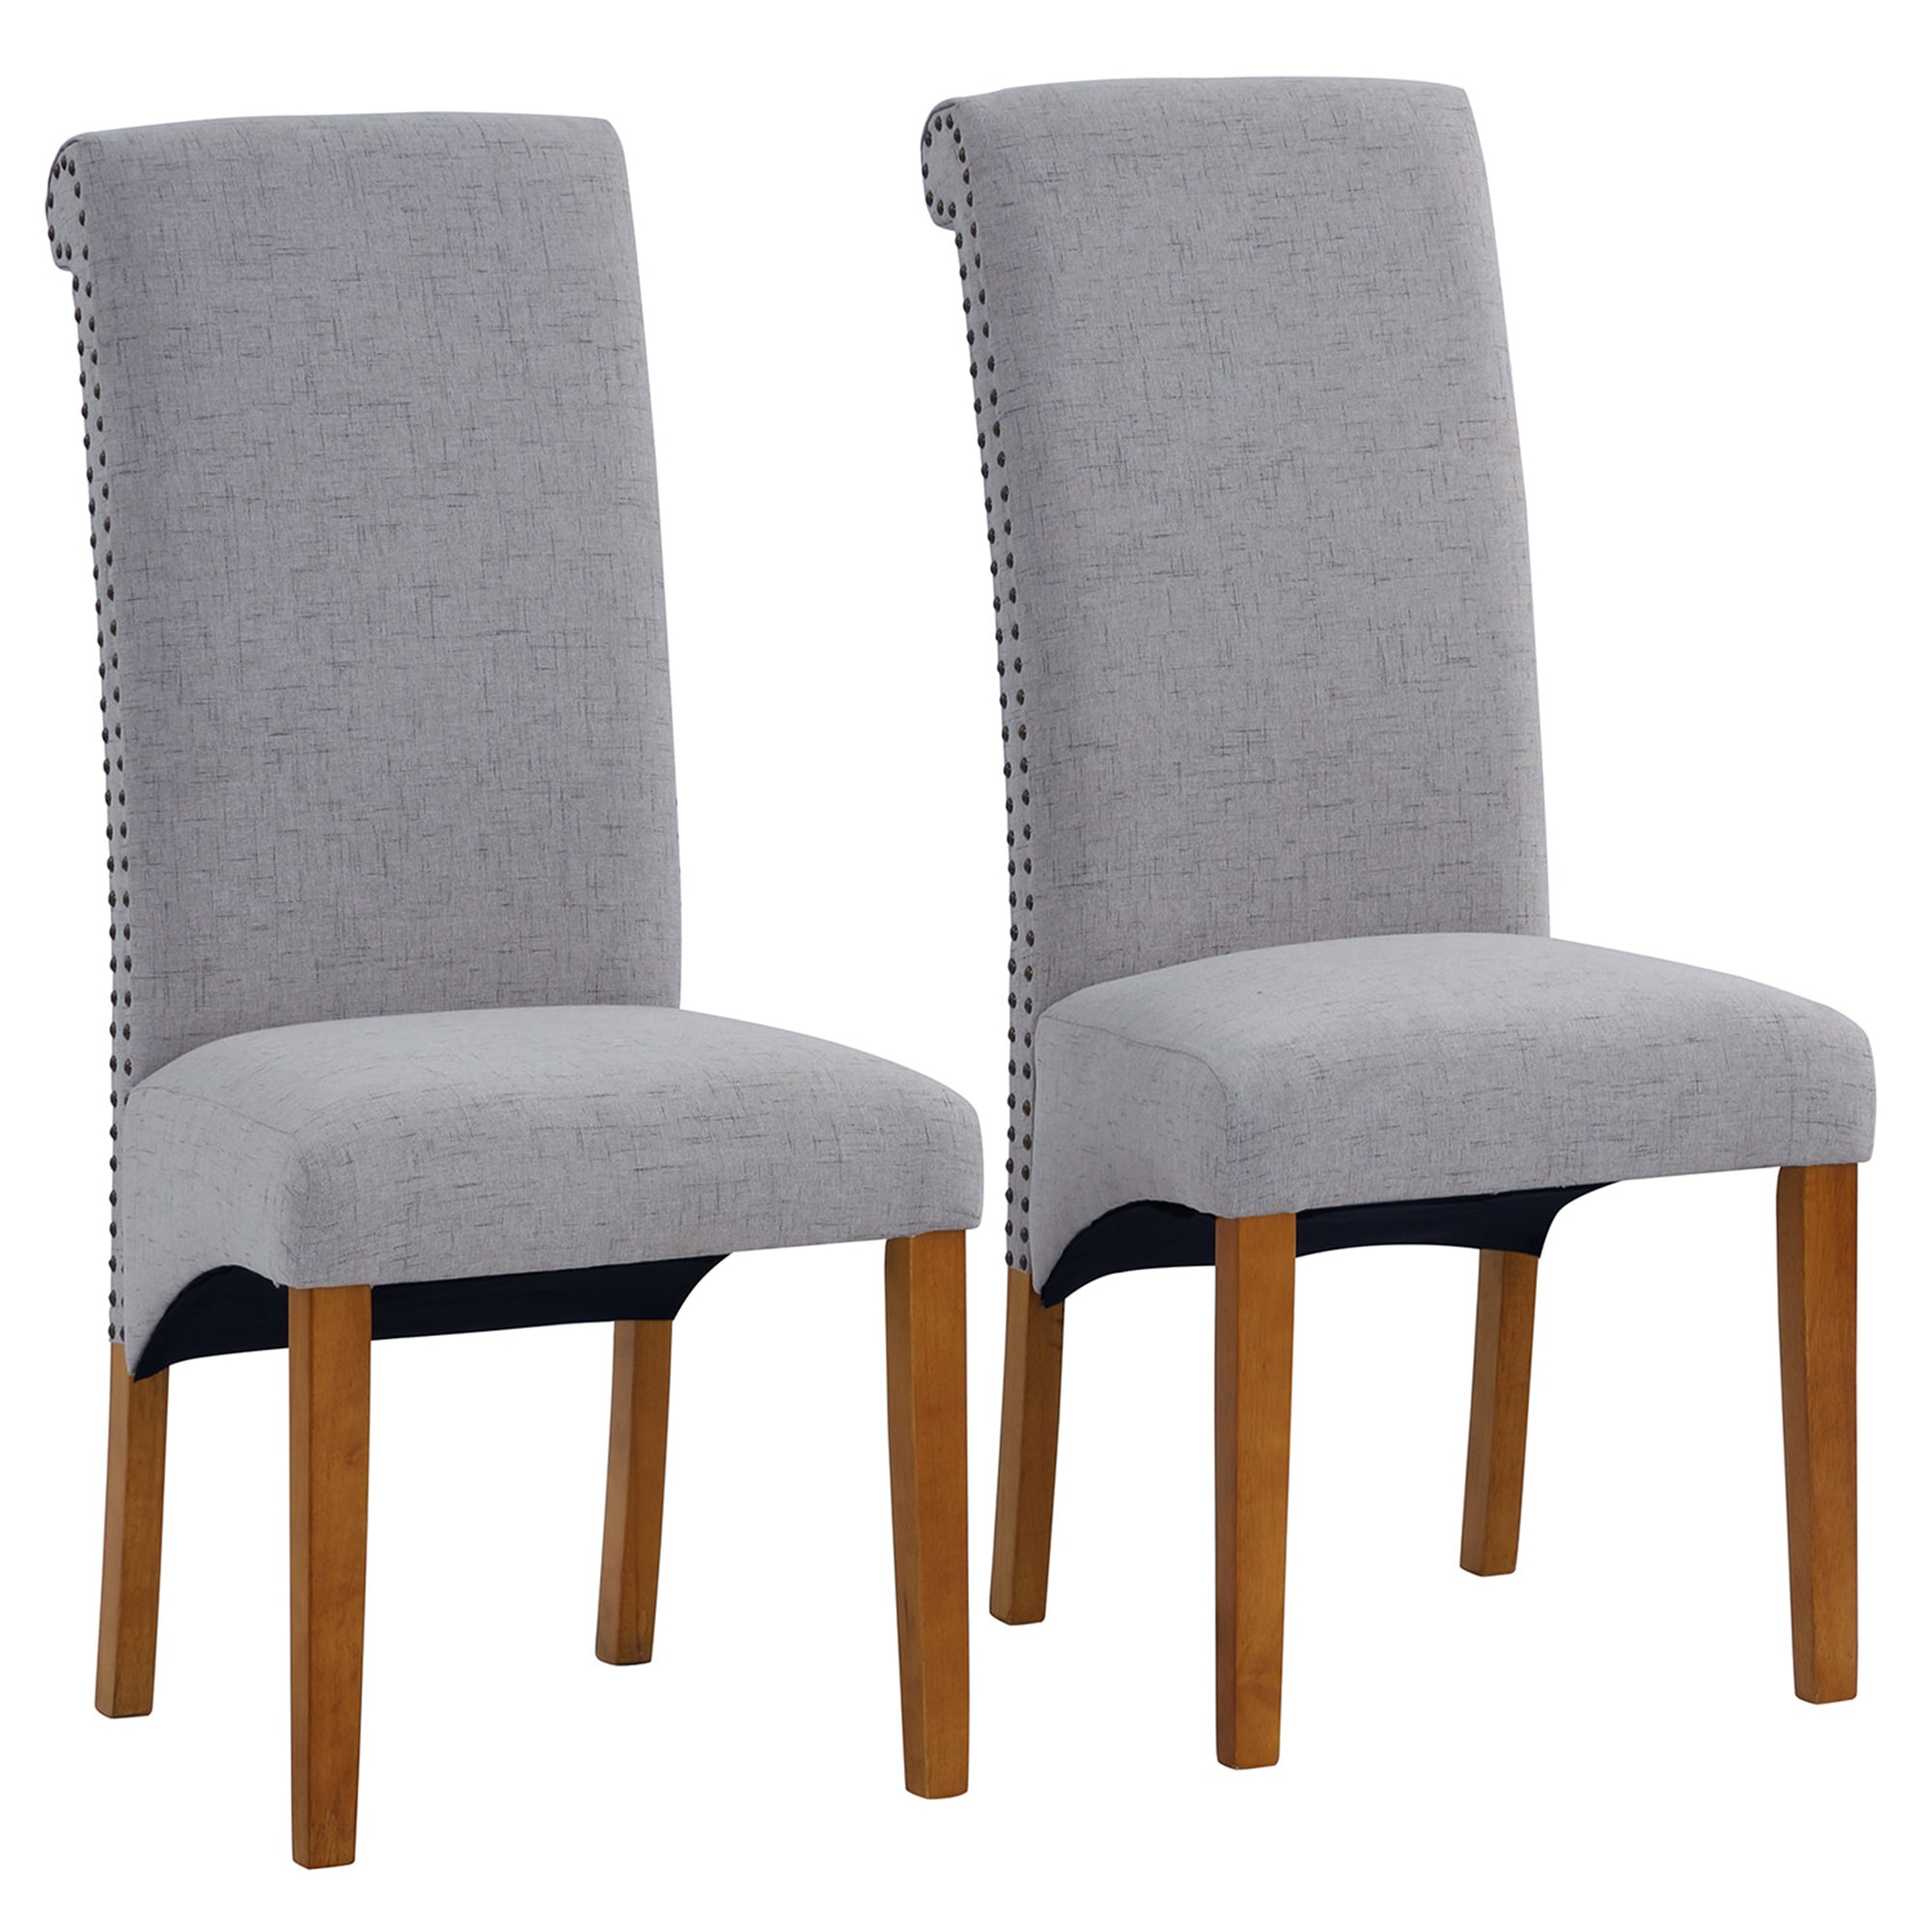 Upholstered Parsons Dining Chairs Set of 2 Faux Leather Dining Room Chair  High Back Carving Rubberwood Dining Chair with Solid Wood Leg for Dining